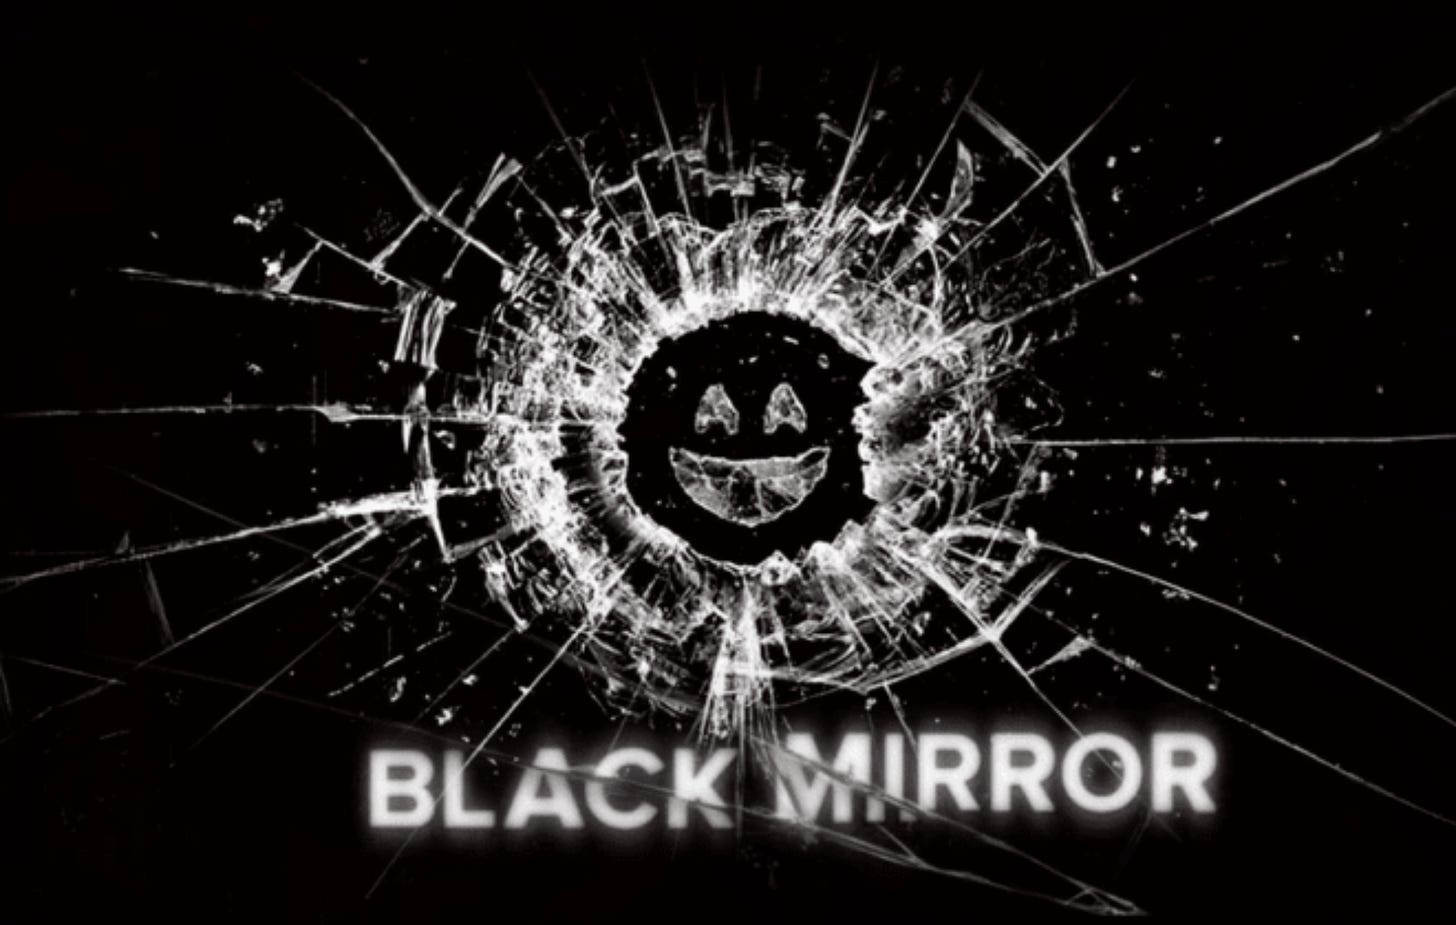 Black Mirror Season 5: Release date, trailers and everything we know so far